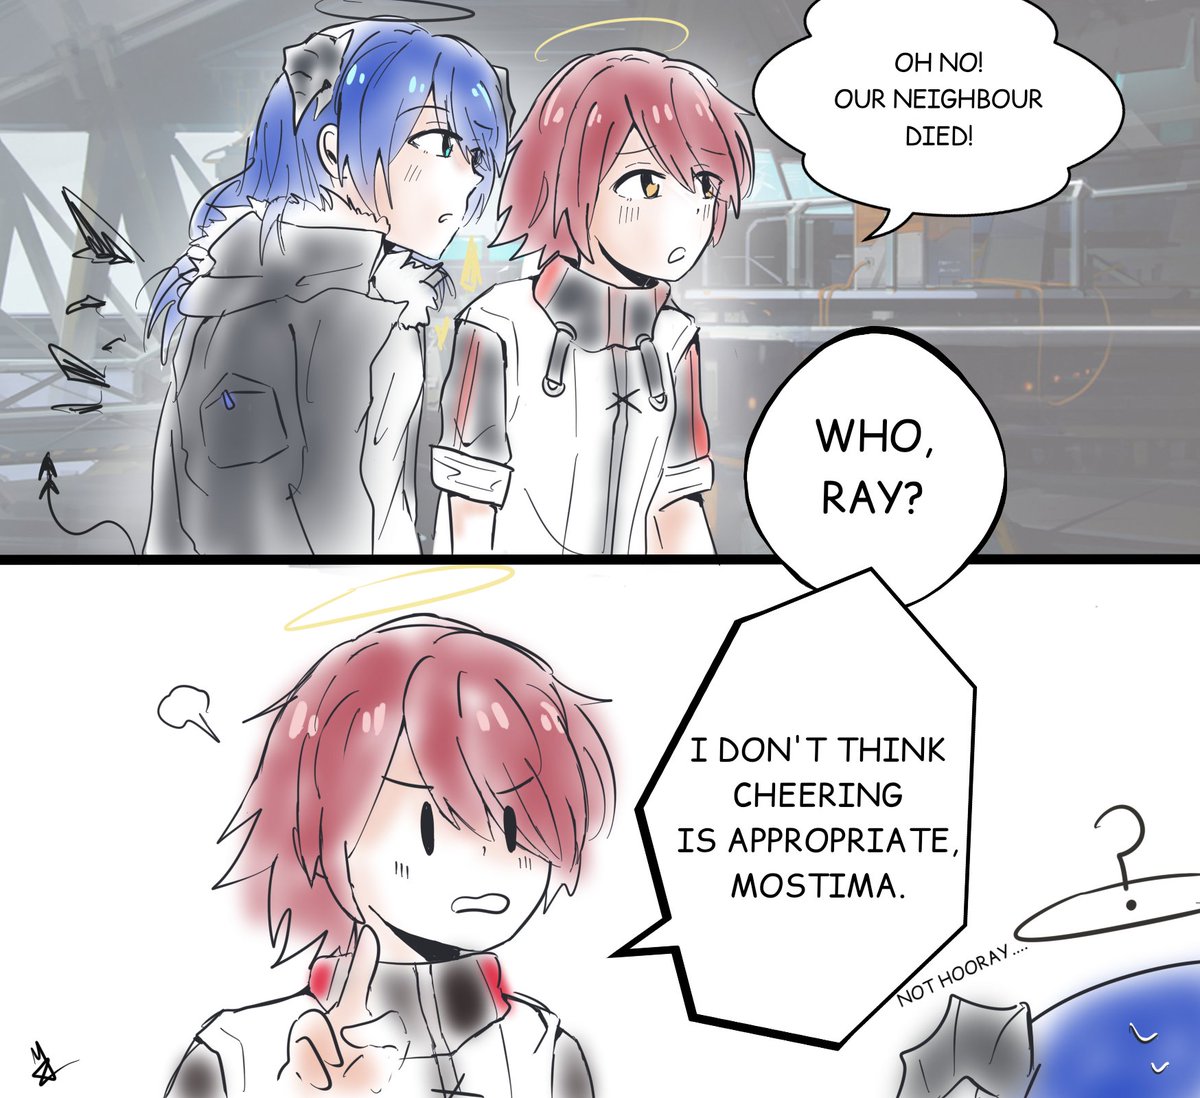 This would totally happen
#Arknights #アークナイツ #明日方舟 